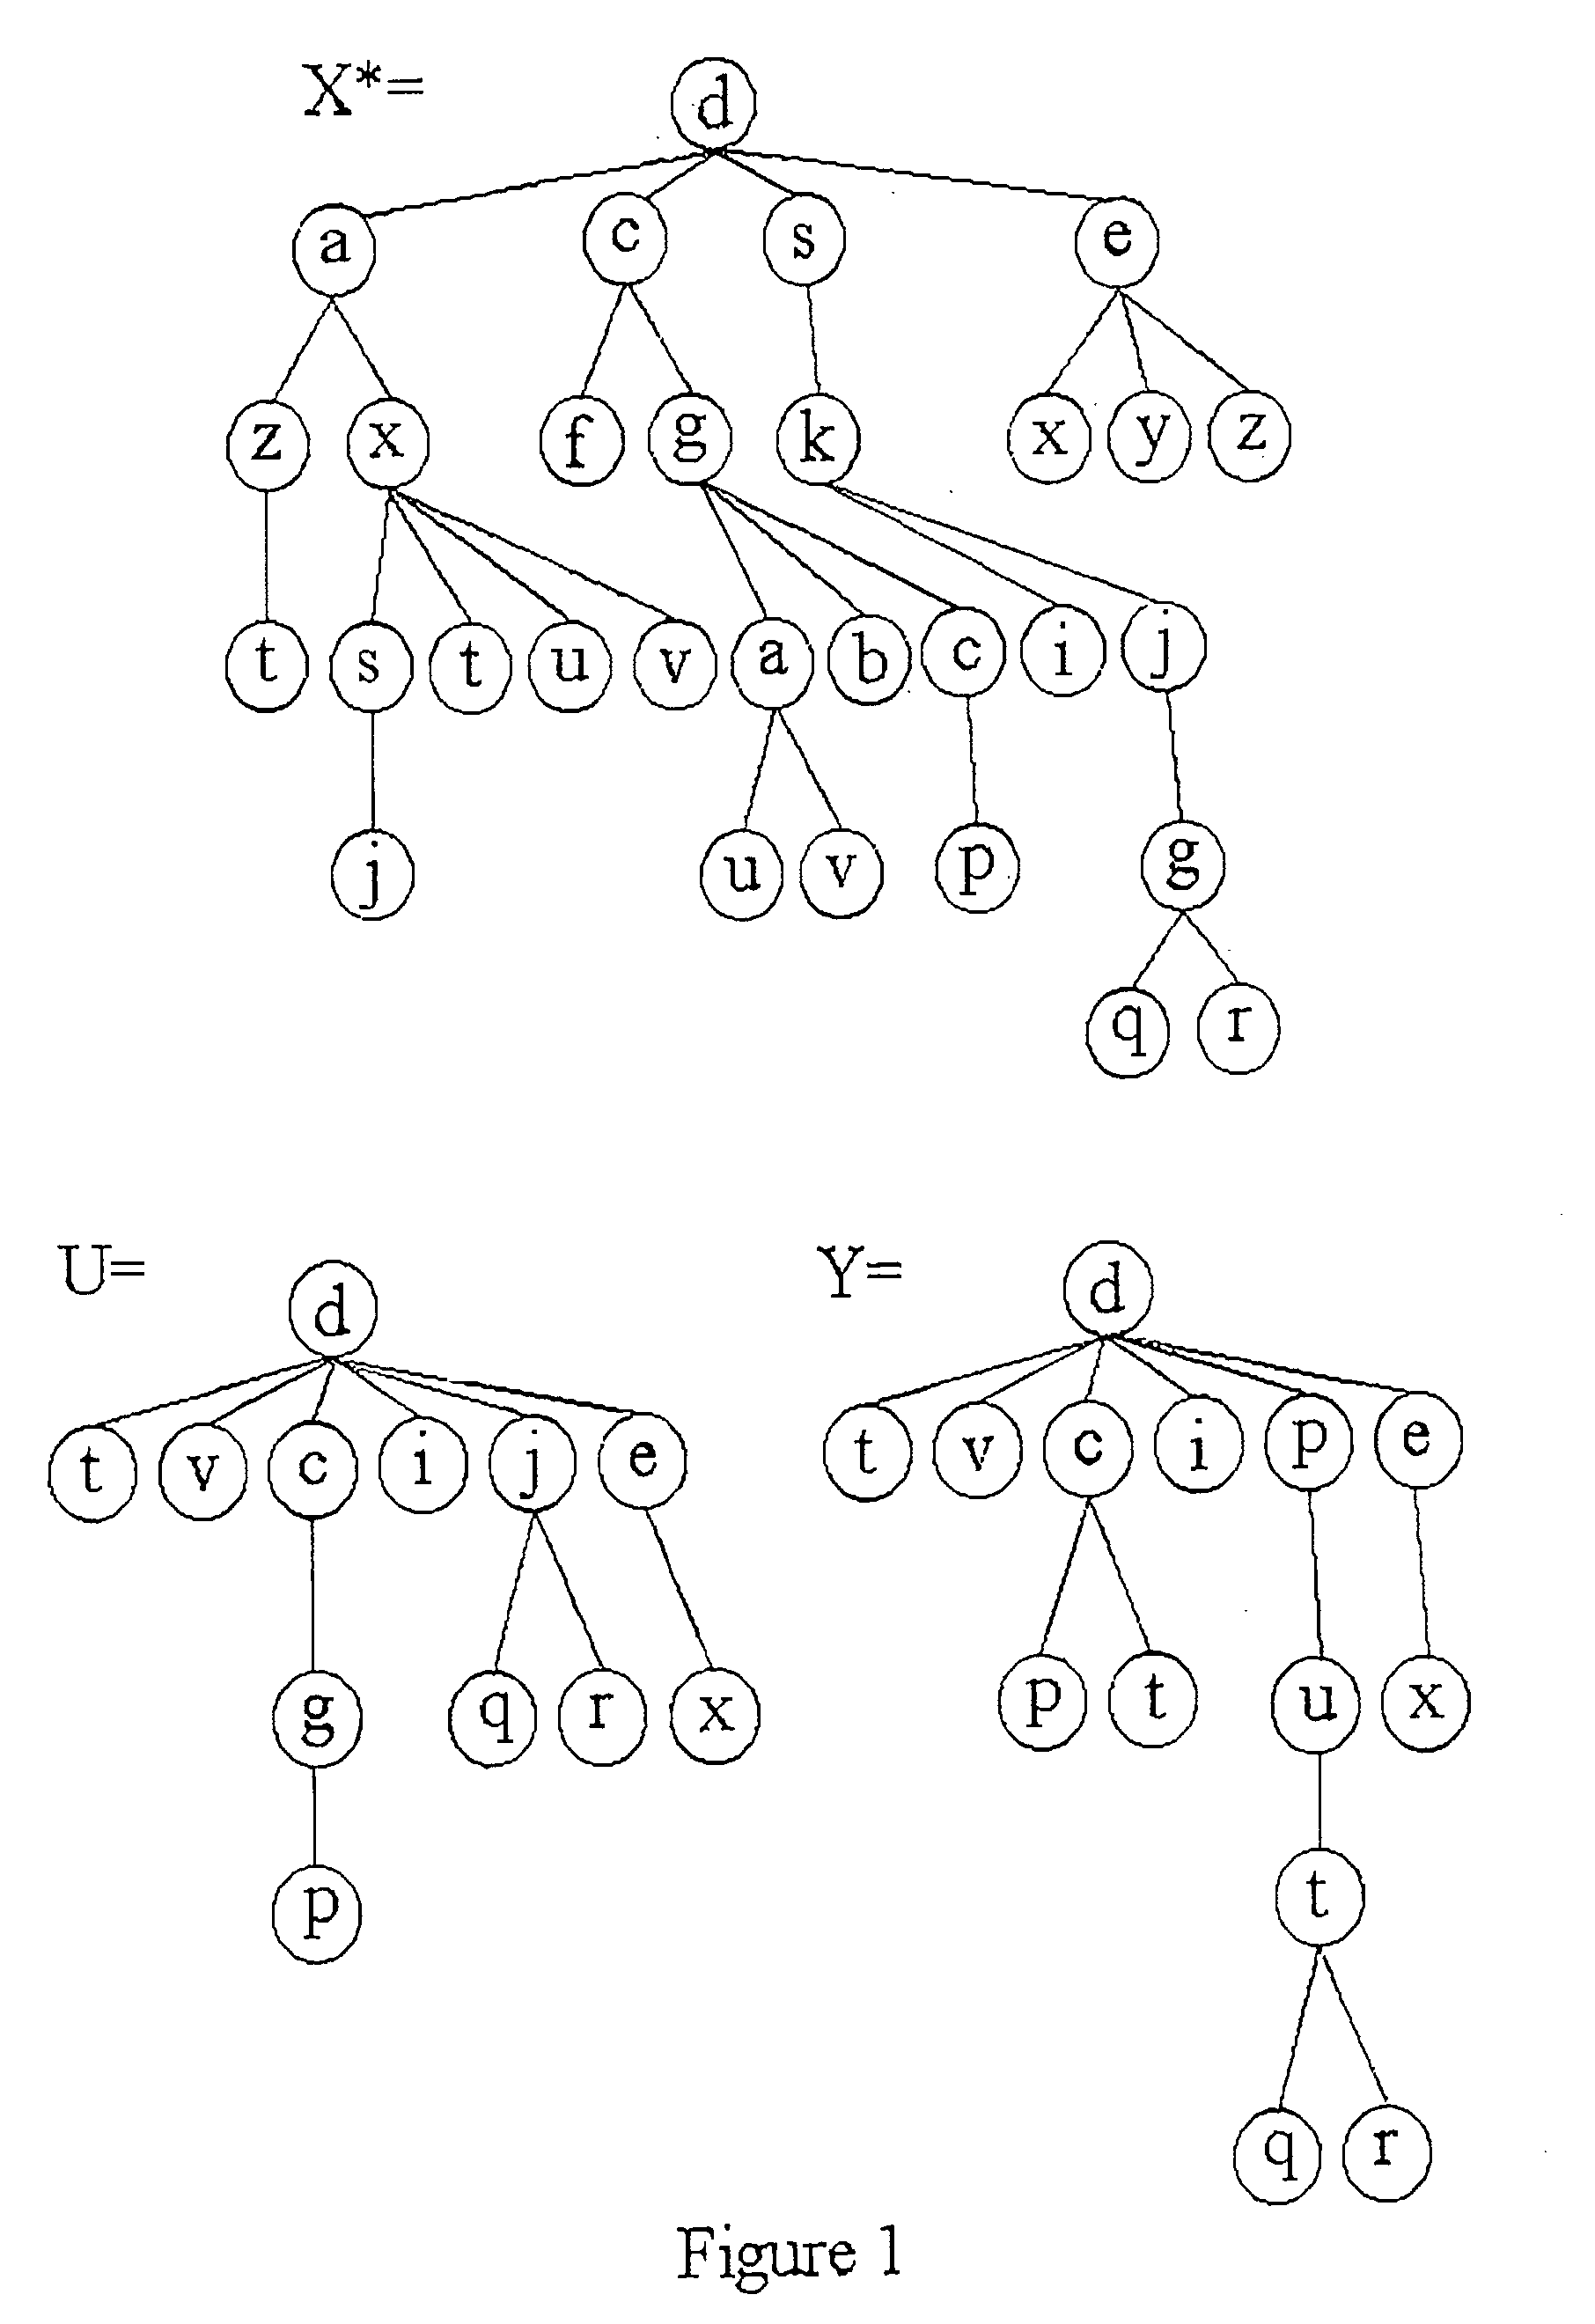 Method for recognizing trees by processing potentially noisy subsequence trees